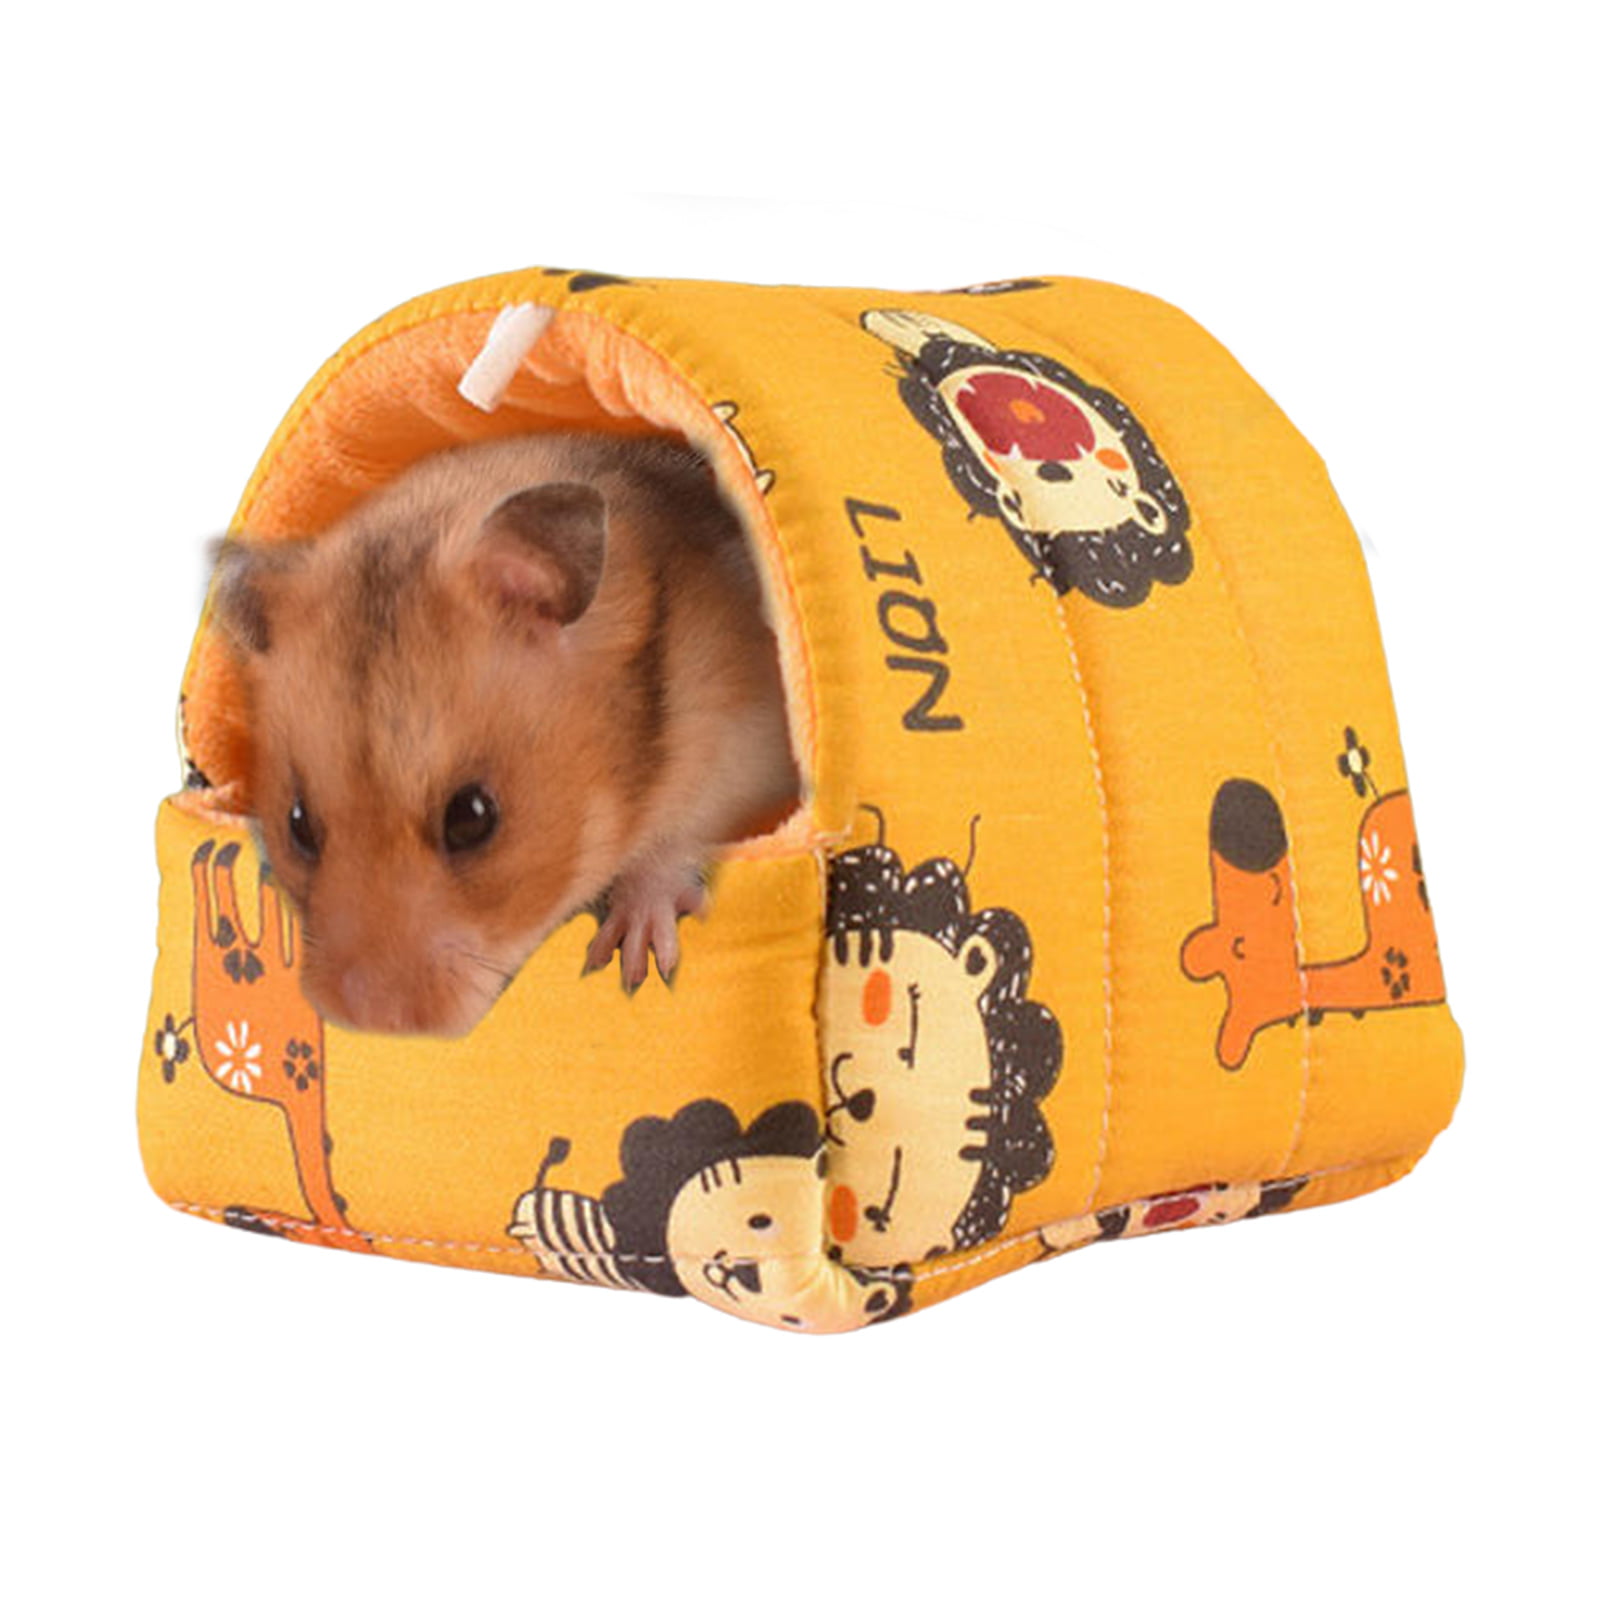 Rabbit Guinea Pig Hamster House Bed Cute Small Animal Pet Winter Warm Squirrel 